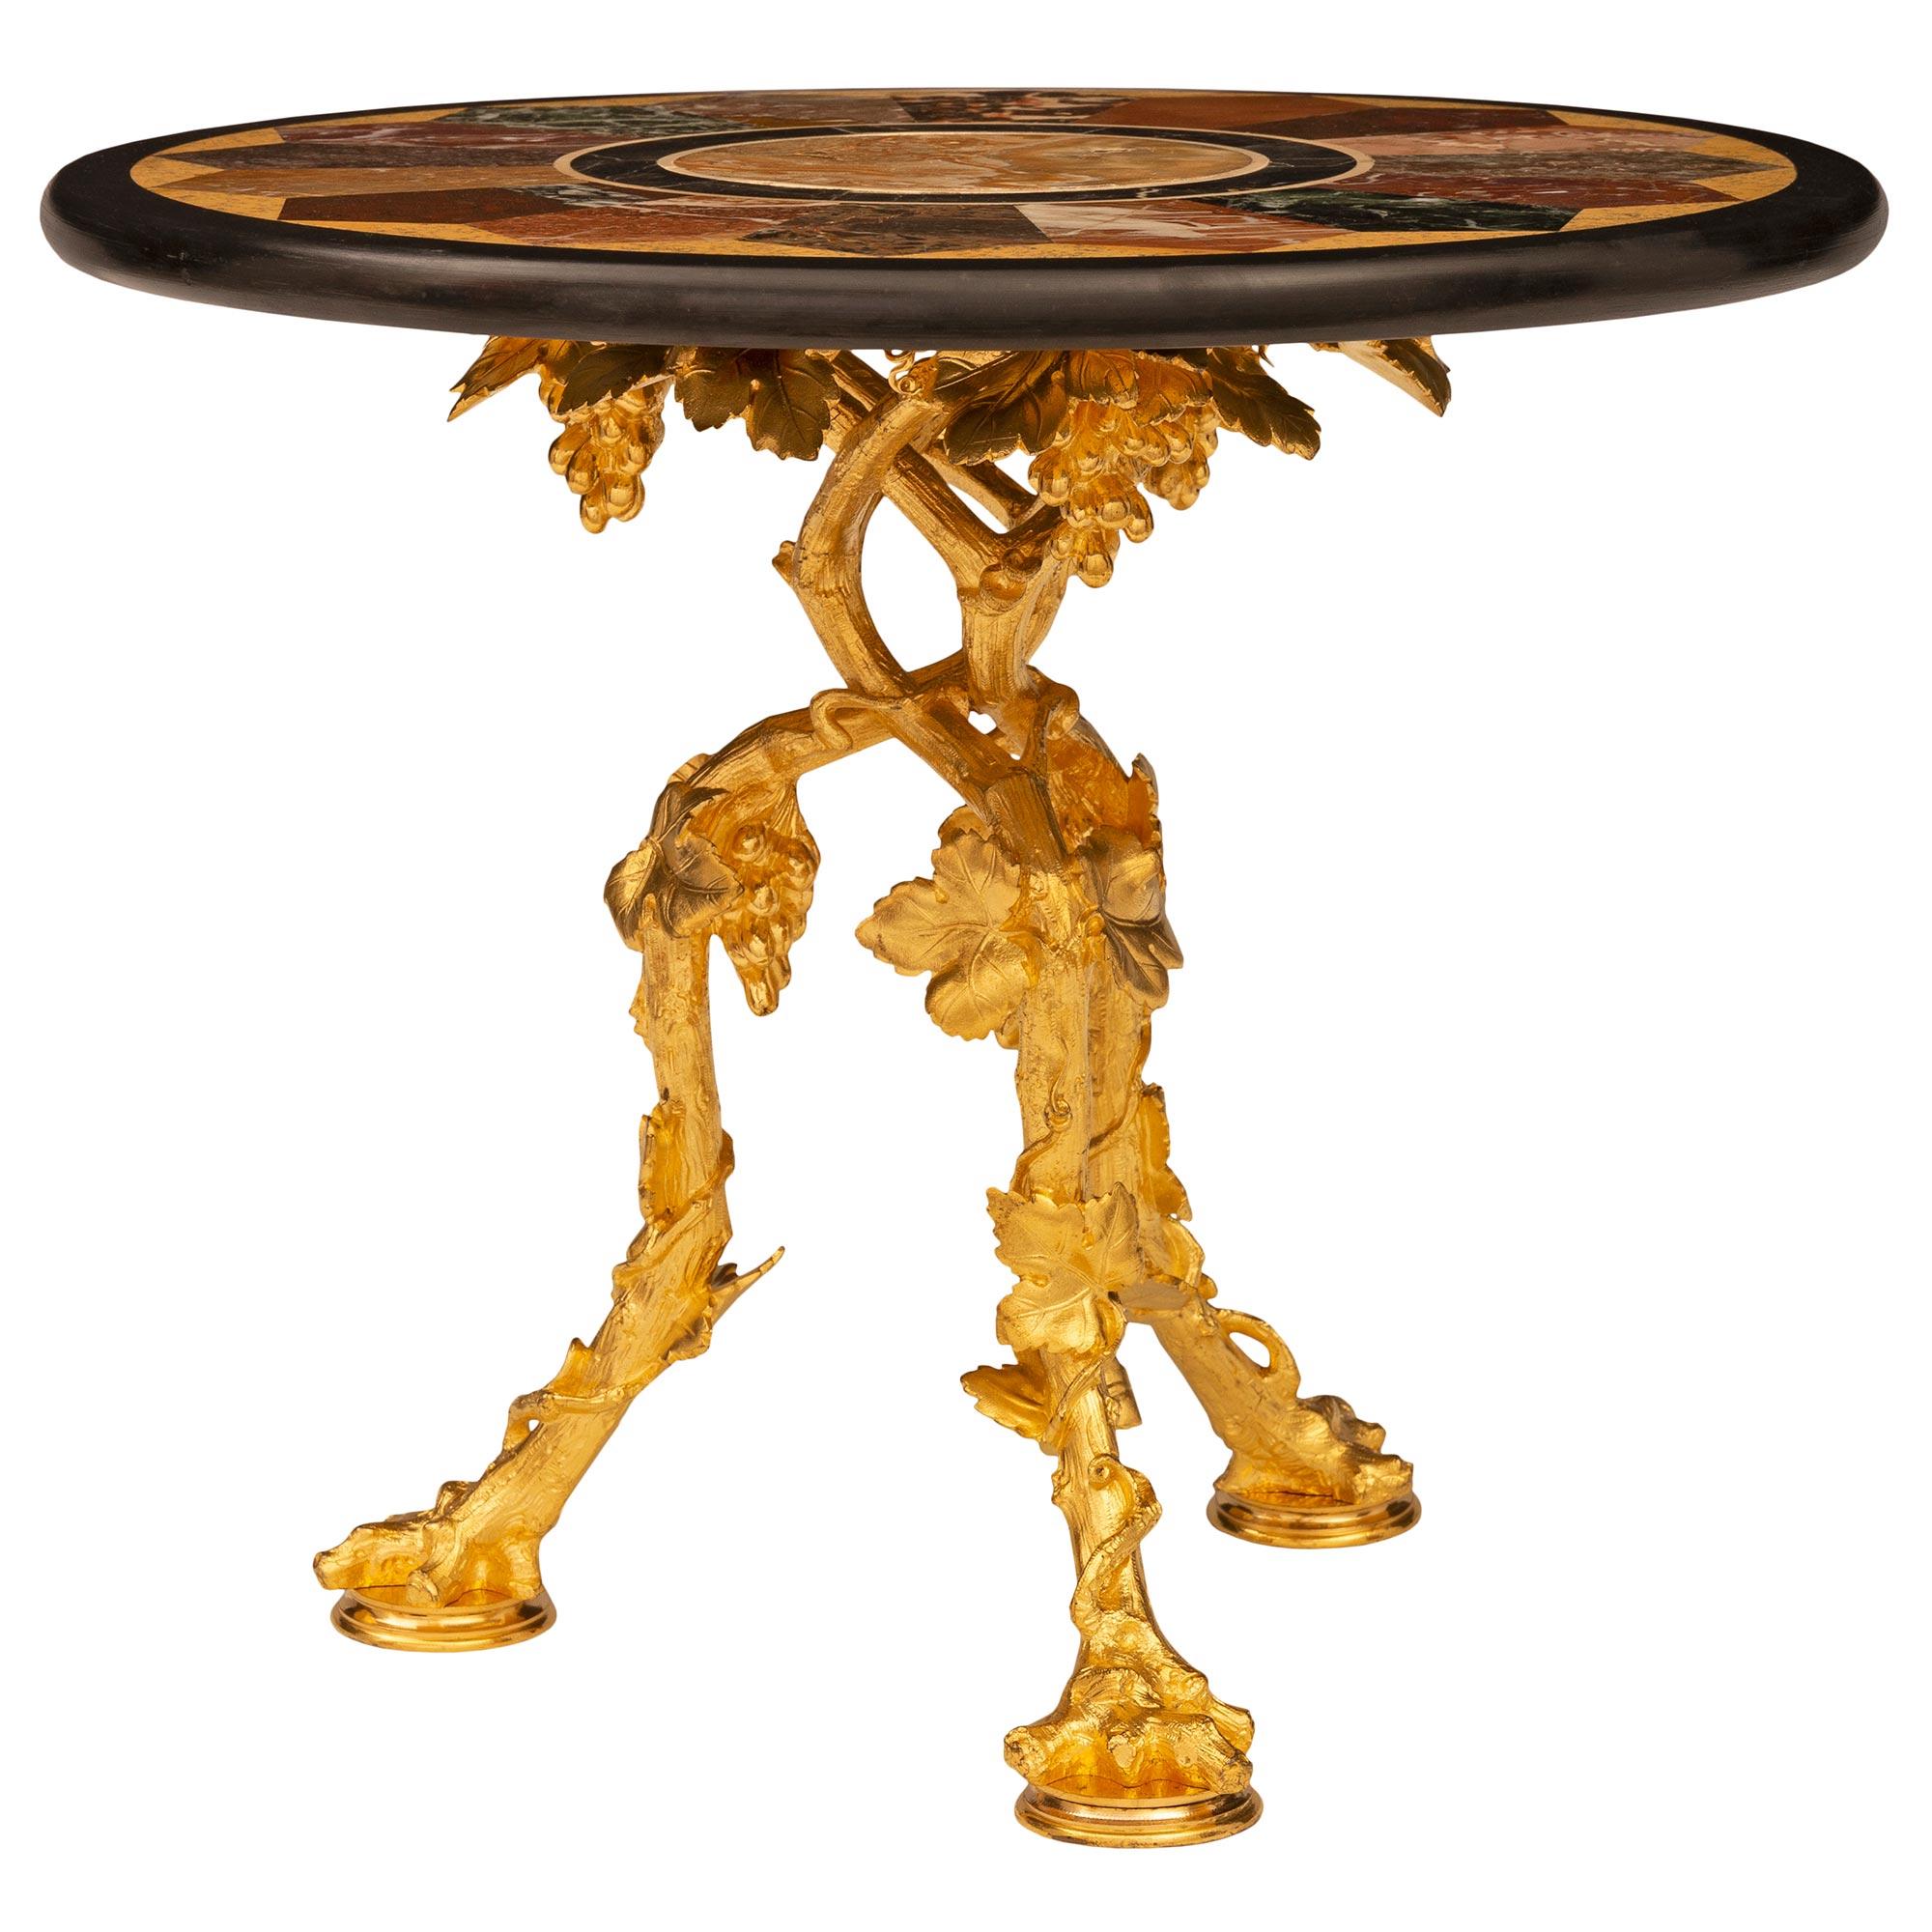 Italian 19th Century Ormolu and Pietra Dura Marble Low Side Table/Pedestal In Good Condition For Sale In West Palm Beach, FL